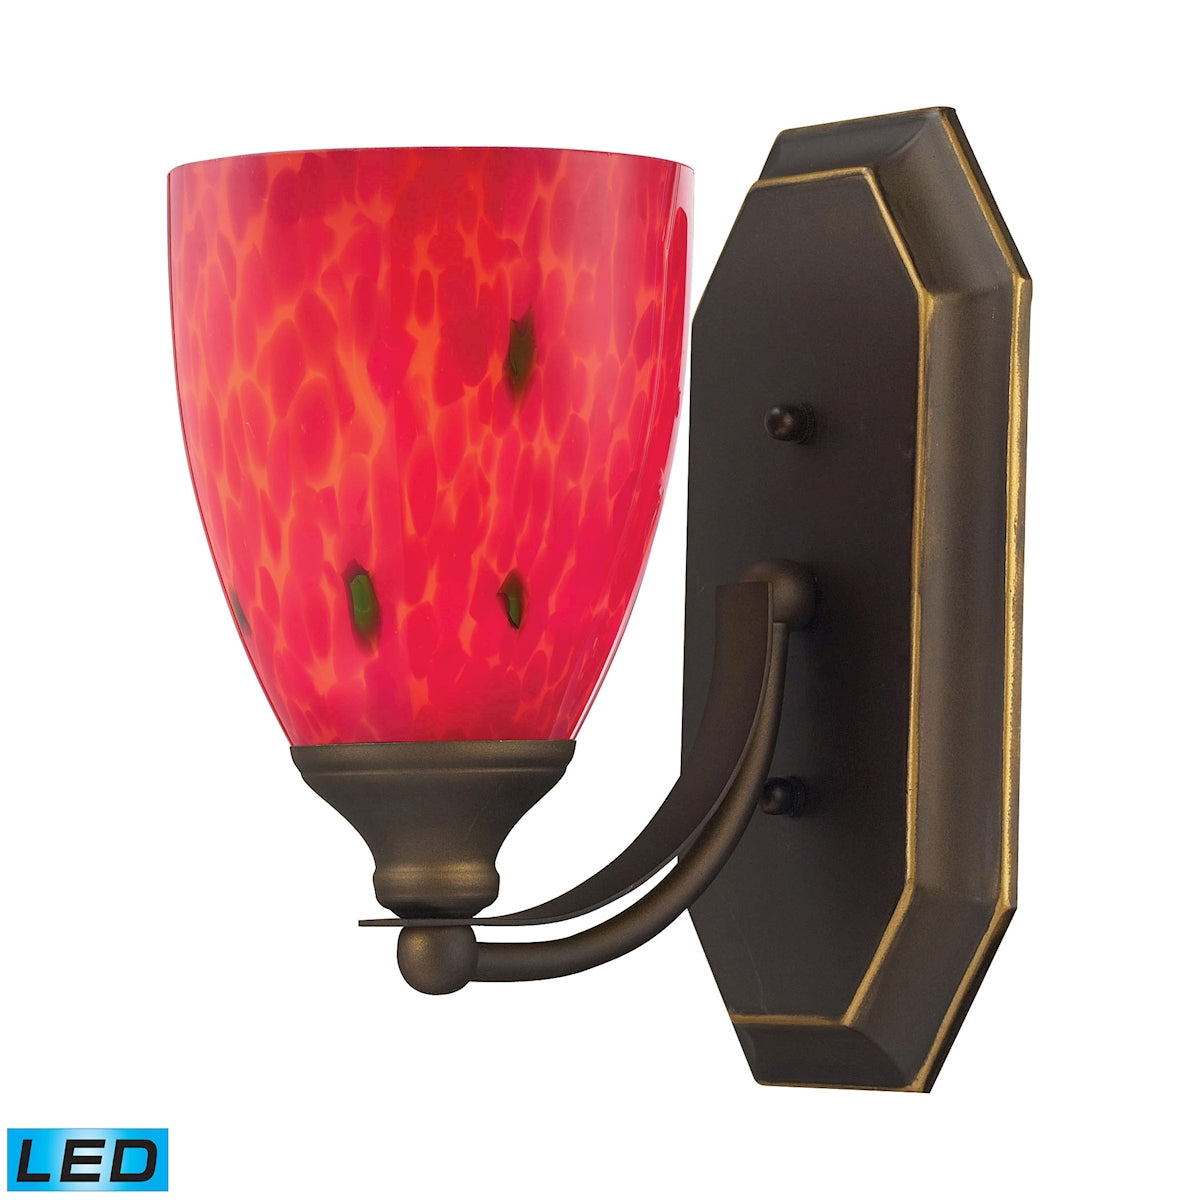 Mix-N-Match Vanity 1-Light Wall Lamp in Aged Bronze with Fire Red Glass - Includes LED Bulb